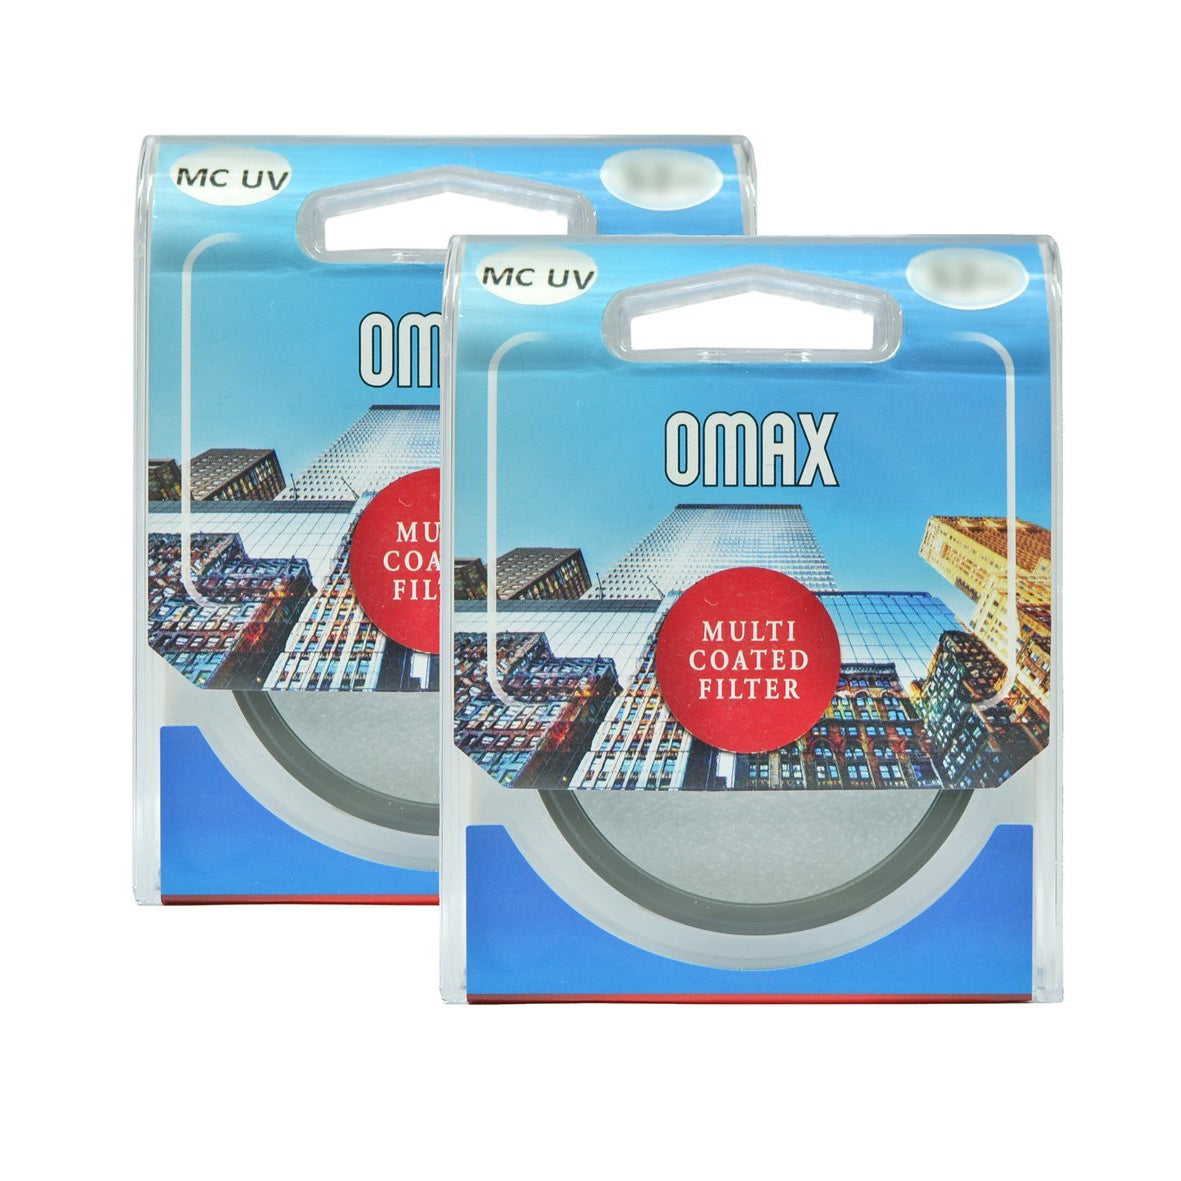 Omax 58mm mc uv Filter for Canon 18-55 & 55-250mm Lens (Set of 2) - The Camerashop